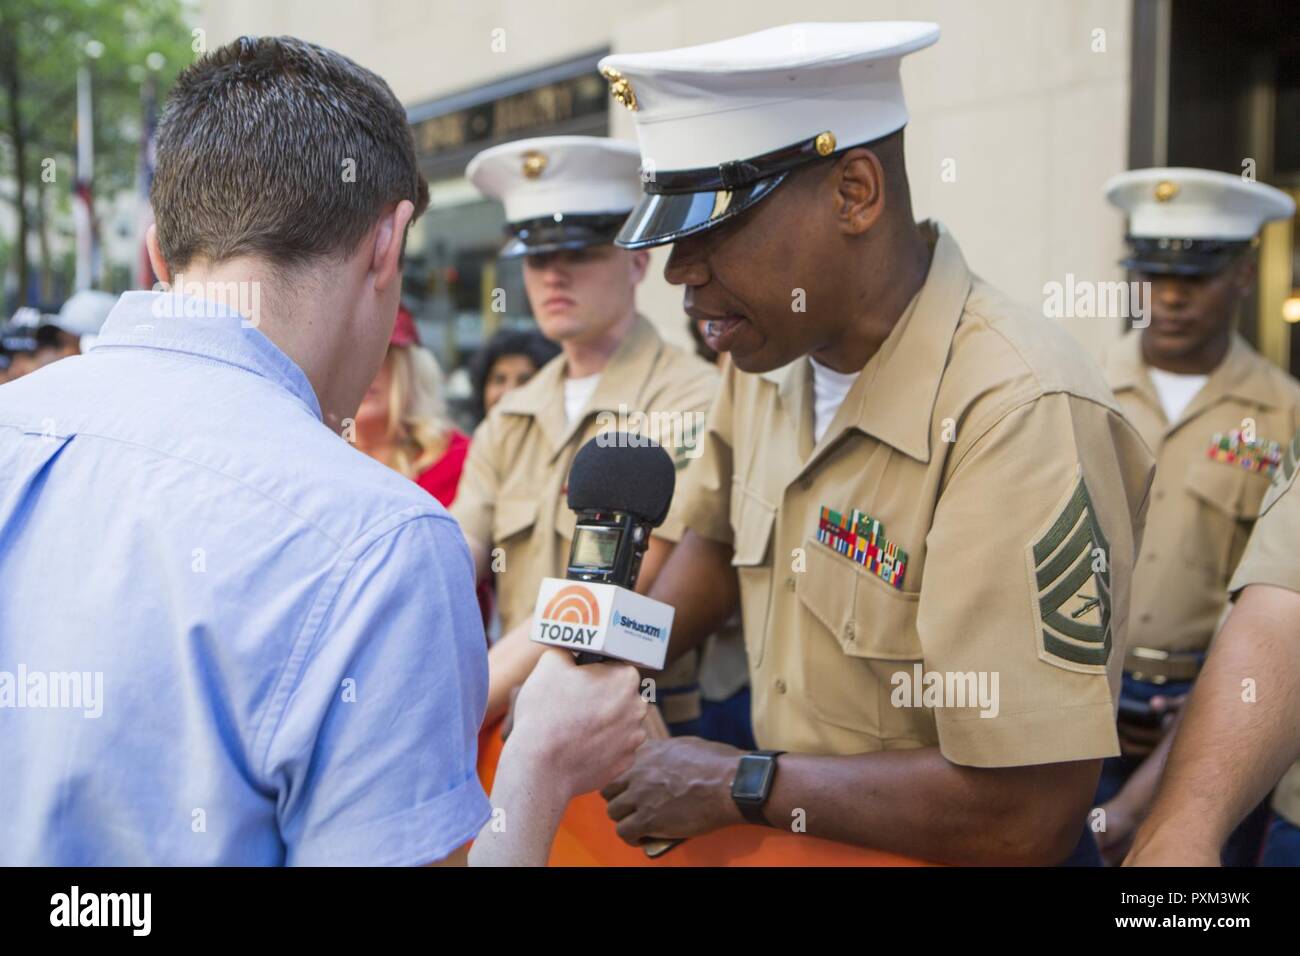 Gunnery Sgt. Justin A. Hauser, enlisted conductor of Marine Corps Band New Orleans, talks with Alex Ficquette, the Rockefeller plaza producer, during the airing of NBC’s Today Show at Rockefeller Center in New York, June 12, 2017. Hauser spoke about the numerous concerts the band is scheduled to perform June 14-16 to celebrate the closing of the yearlong Marine Corps Reserve Centennial celebration. Stock Photo